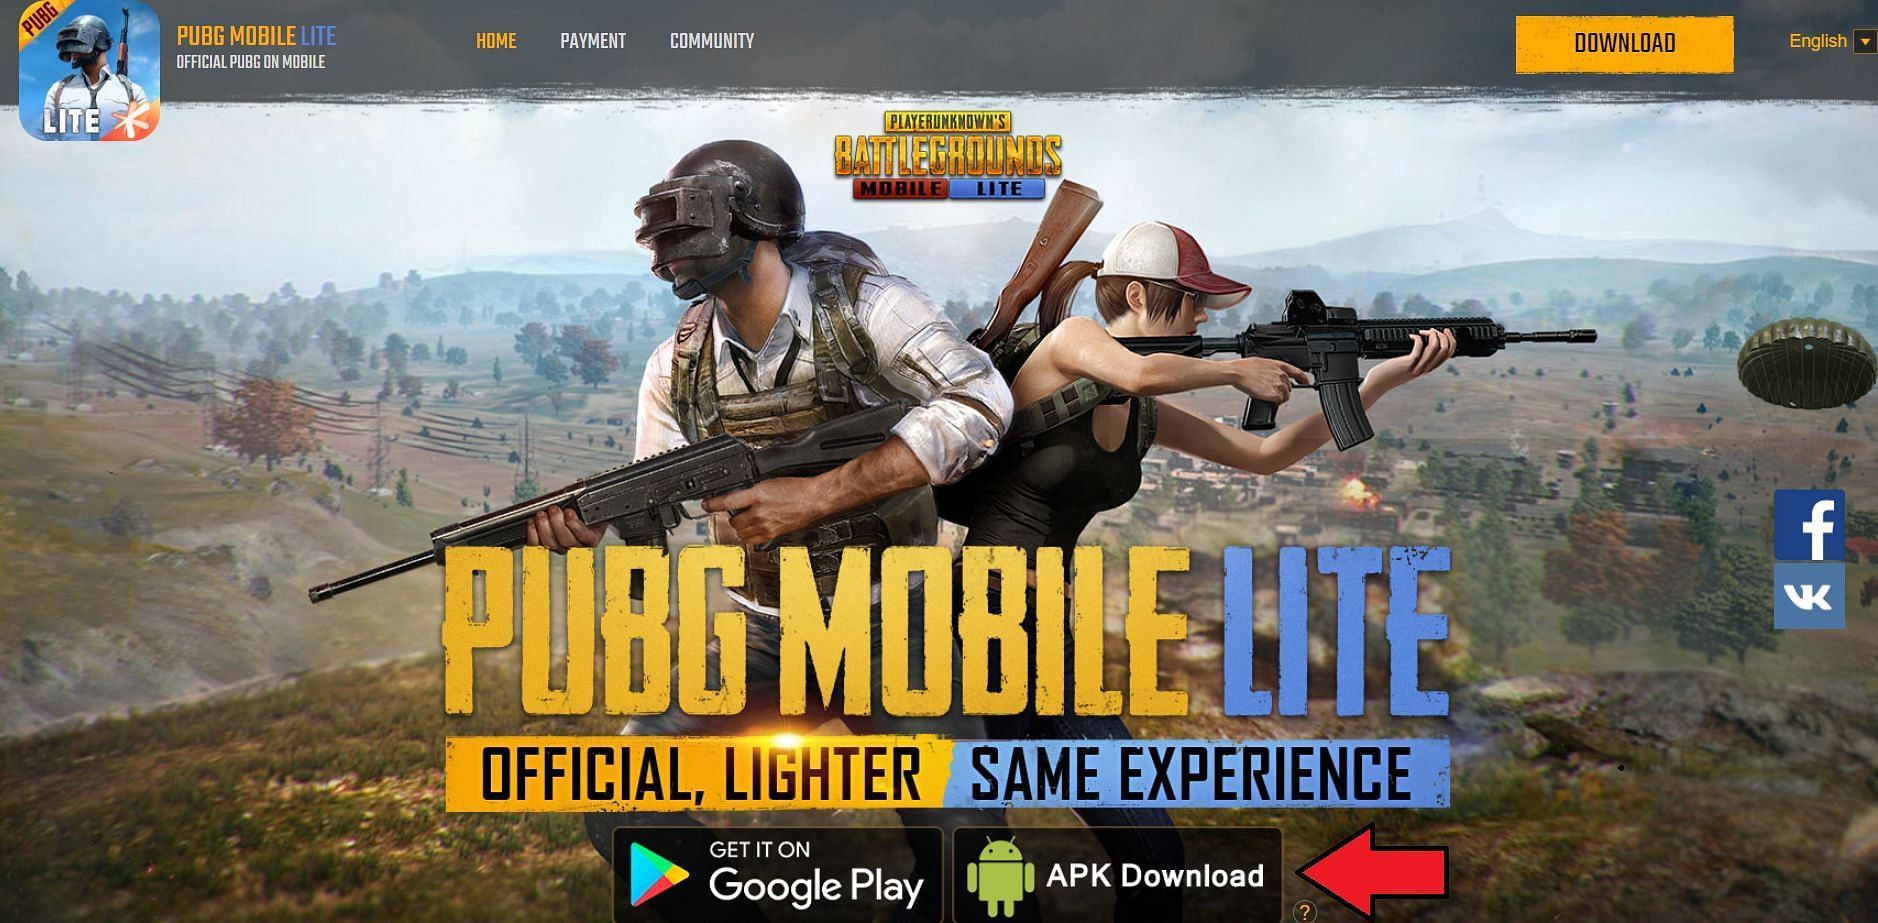 This is what players need to click to download the APK (Image via PUBG Mobile Lite)